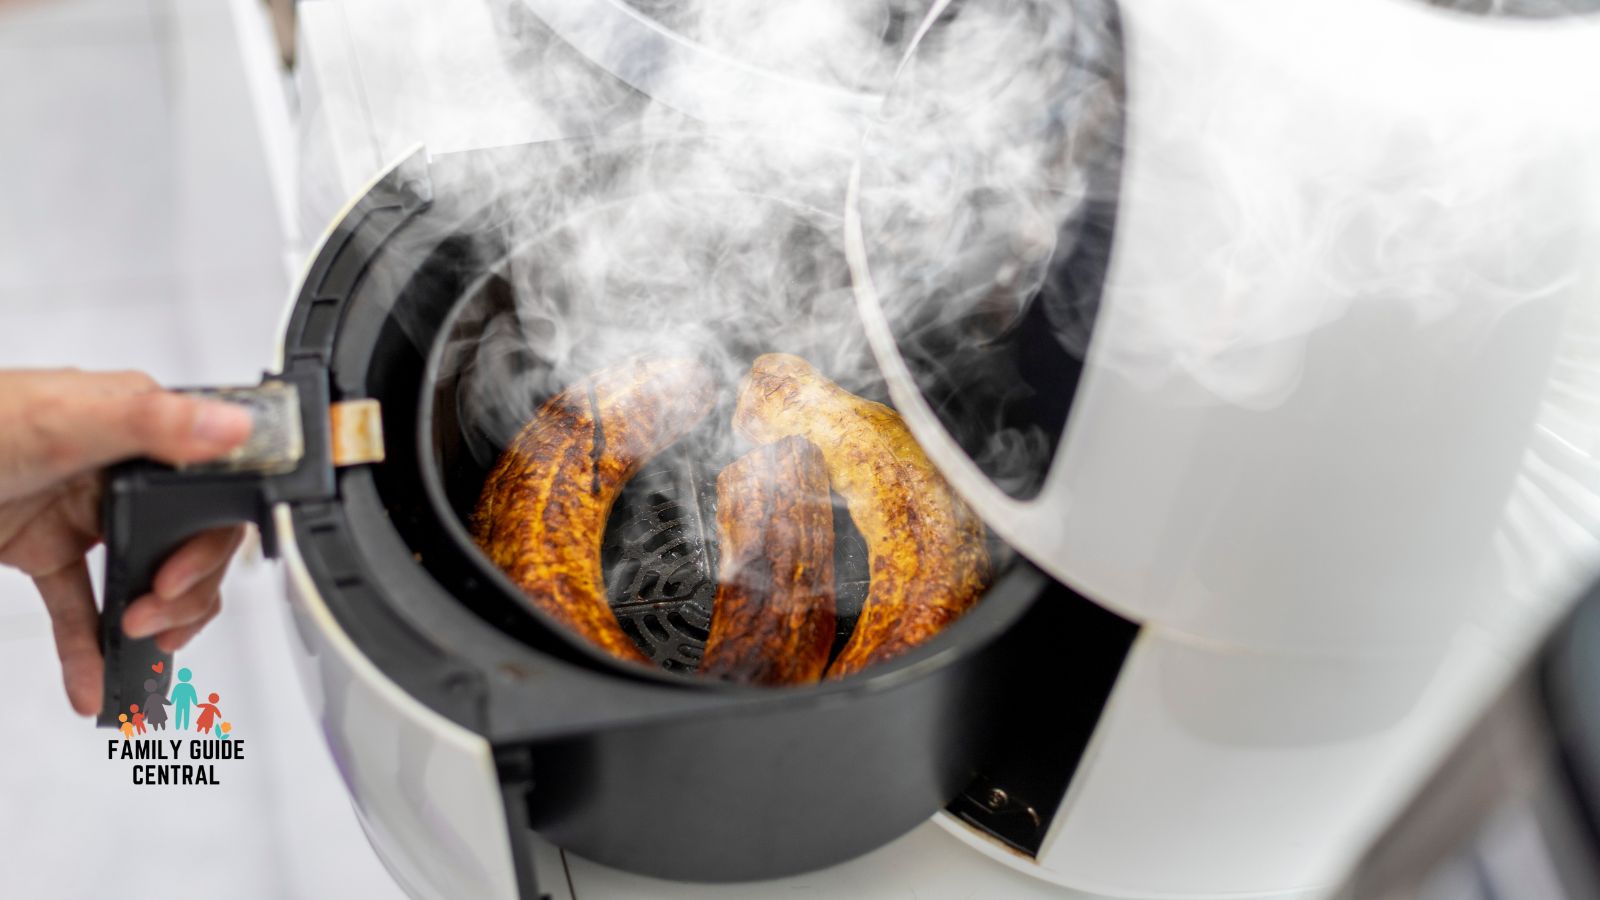 Smoke fumes coming out of an air fryer - familyguidecentral.com